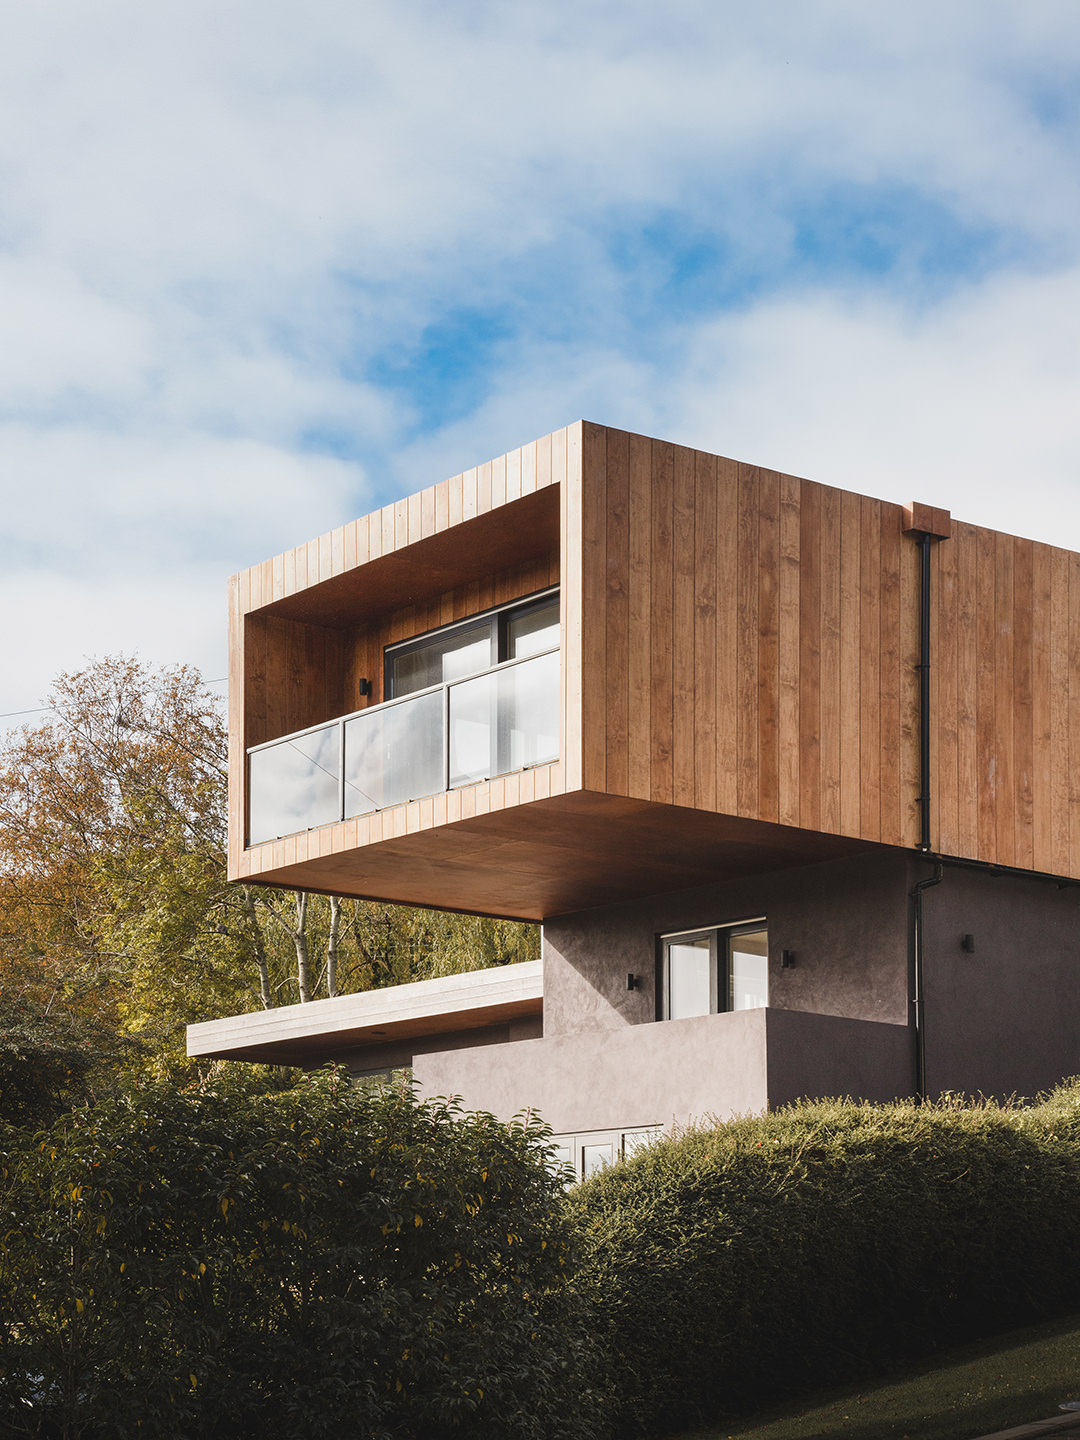 A wooden clad geometric modern building of architectural interest designed by Edge Design Architects Cheltenham.